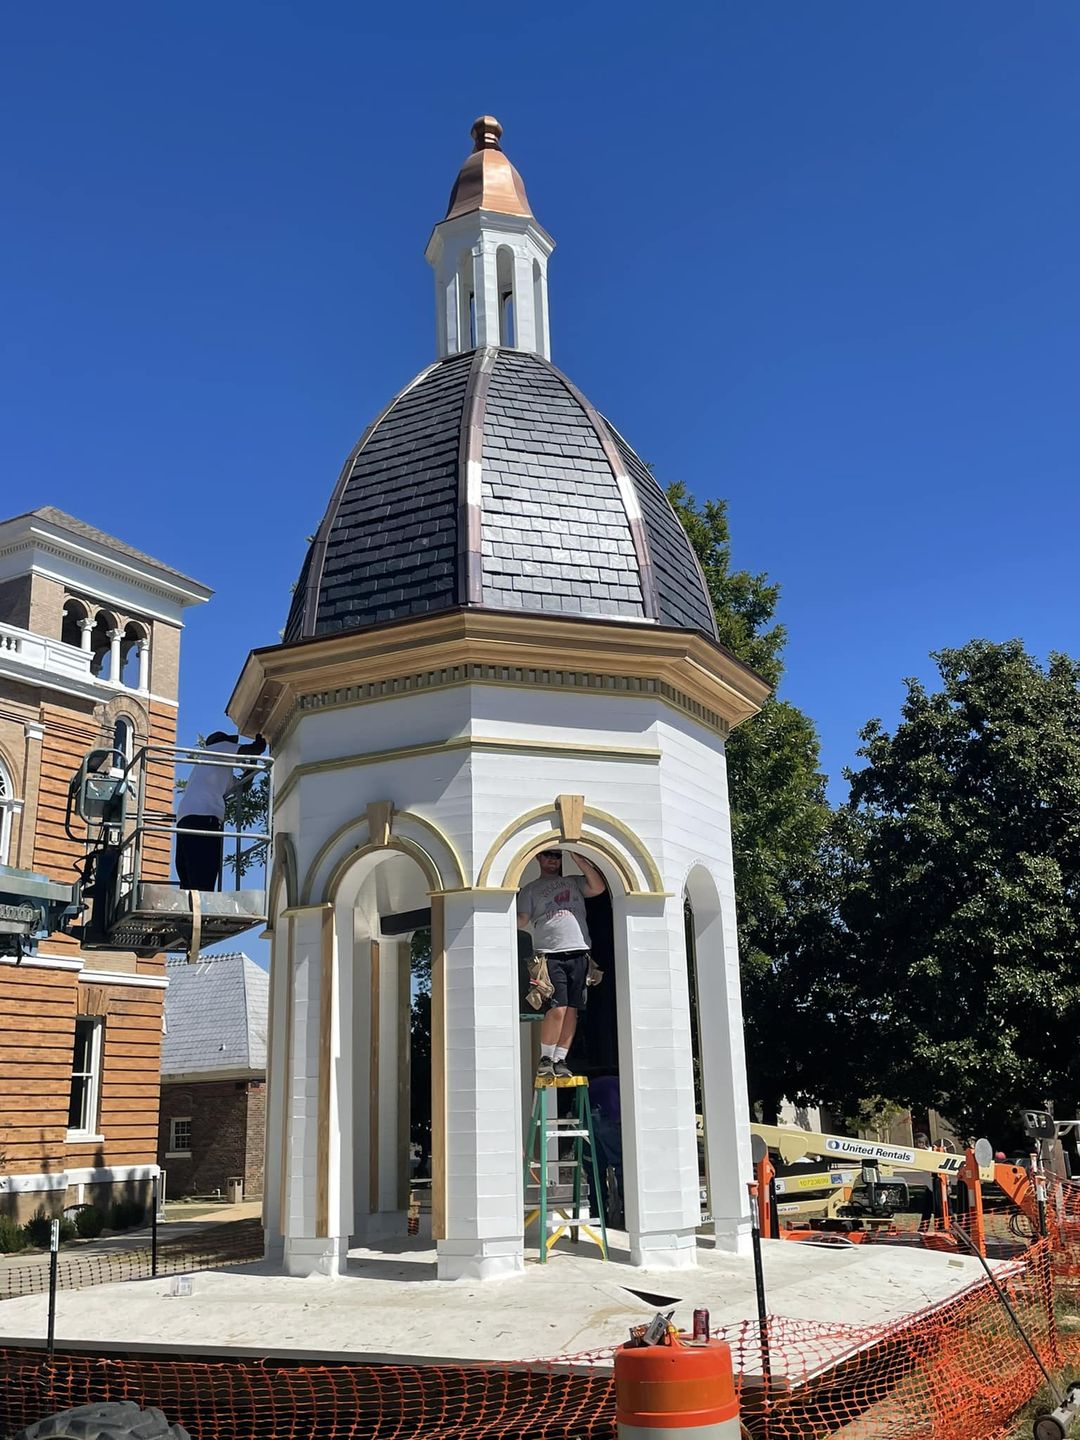 Bell tower getting closer